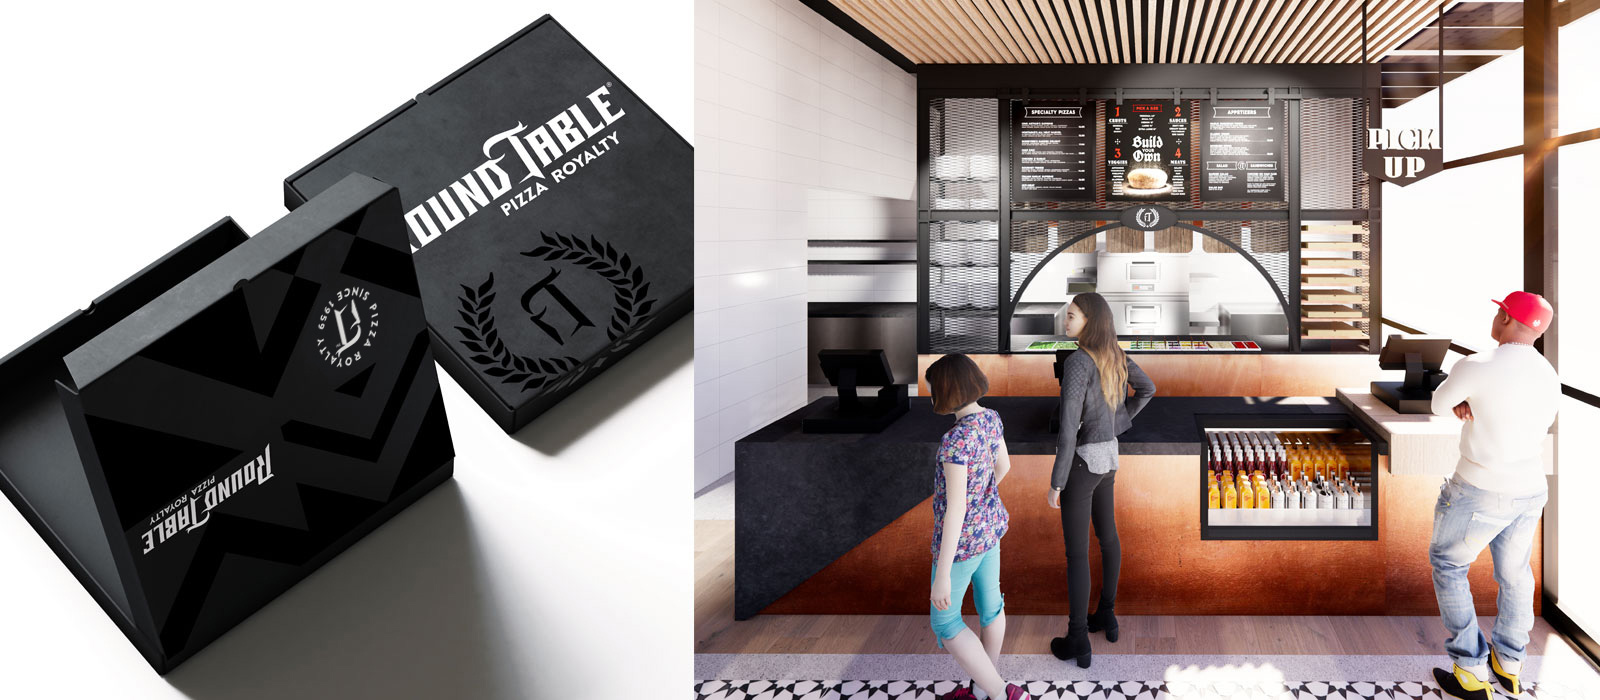 New Logo and Identity for Round Table Pizza by Sterling-Rice Group